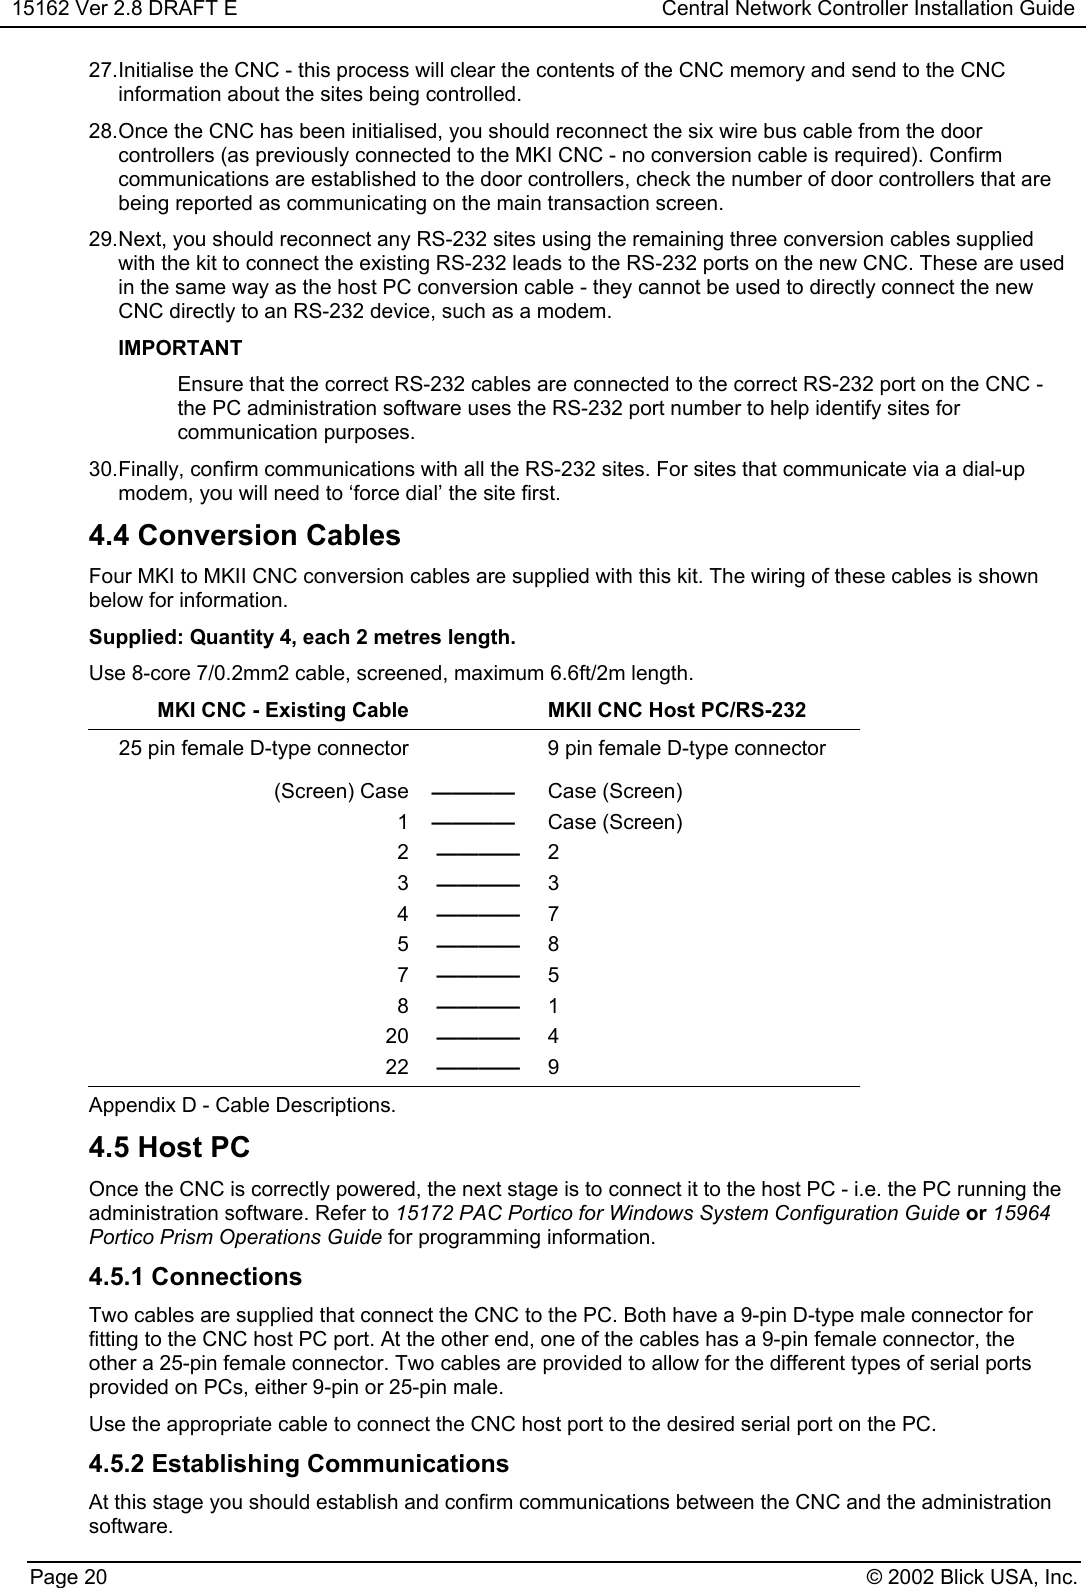 15162 Ver 2.8 DRAFT E Central Network Controller Installation GuidePage 20 © 2002 Blick USA, Inc.27. Initialise the CNC - this process will clear the contents of the CNC memory and send to the CNCinformation about the sites being controlled.28. Once the CNC has been initialised, you should reconnect the six wire bus cable from the doorcontrollers (as previously connected to the MKI CNC - no conversion cable is required). Confirmcommunications are established to the door controllers, check the number of door controllers that arebeing reported as communicating on the main transaction screen.29. Next, you should reconnect any RS-232 sites using the remaining three conversion cables suppliedwith the kit to connect the existing RS-232 leads to the RS-232 ports on the new CNC. These are usedin the same way as the host PC conversion cable - they cannot be used to directly connect the newCNC directly to an RS-232 device, such as a modem.IMPORTANTEnsure that the correct RS-232 cables are connected to the correct RS-232 port on the CNC -the PC administration software uses the RS-232 port number to help identify sites forcommunication purposes.30. Finally, confirm communications with all the RS-232 sites. For sites that communicate via a dial-upmodem, you will need to ‘force dial’ the site first.4.4 Conversion CablesFour MKI to MKII CNC conversion cables are supplied with this kit. The wiring of these cables is shownbelow for information.Supplied: Quantity 4, each 2 metres length.Use 8-core 7/0.2mm2 cable, screened, maximum 6.6ft/2m length.MKI CNC - Existing Cable MKII CNC Host PC/RS-23225 pin female D-type connector 9 pin female D-type connector(Screen) Case ———— Case (Screen)1———— Case (Screen)2———— 23———— 34———— 75———— 87———— 58———— 120 ———— 422 ———— 9Appendix D - Cable Descriptions.4.5 Host PCOnce the CNC is correctly powered, the next stage is to connect it to the host PC - i.e. the PC running theadministration software. Refer to 15172 PAC Portico for Windows System Configuration Guide or 15964Portico Prism Operations Guide for programming information.4.5.1 ConnectionsTwo cables are supplied that connect the CNC to the PC. Both have a 9-pin D-type male connector forfitting to the CNC host PC port. At the other end, one of the cables has a 9-pin female connector, theother a 25-pin female connector. Two cables are provided to allow for the different types of serial portsprovided on PCs, either 9-pin or 25-pin male.Use the appropriate cable to connect the CNC host port to the desired serial port on the PC.4.5.2 Establishing CommunicationsAt this stage you should establish and confirm communications between the CNC and the administrationsoftware.